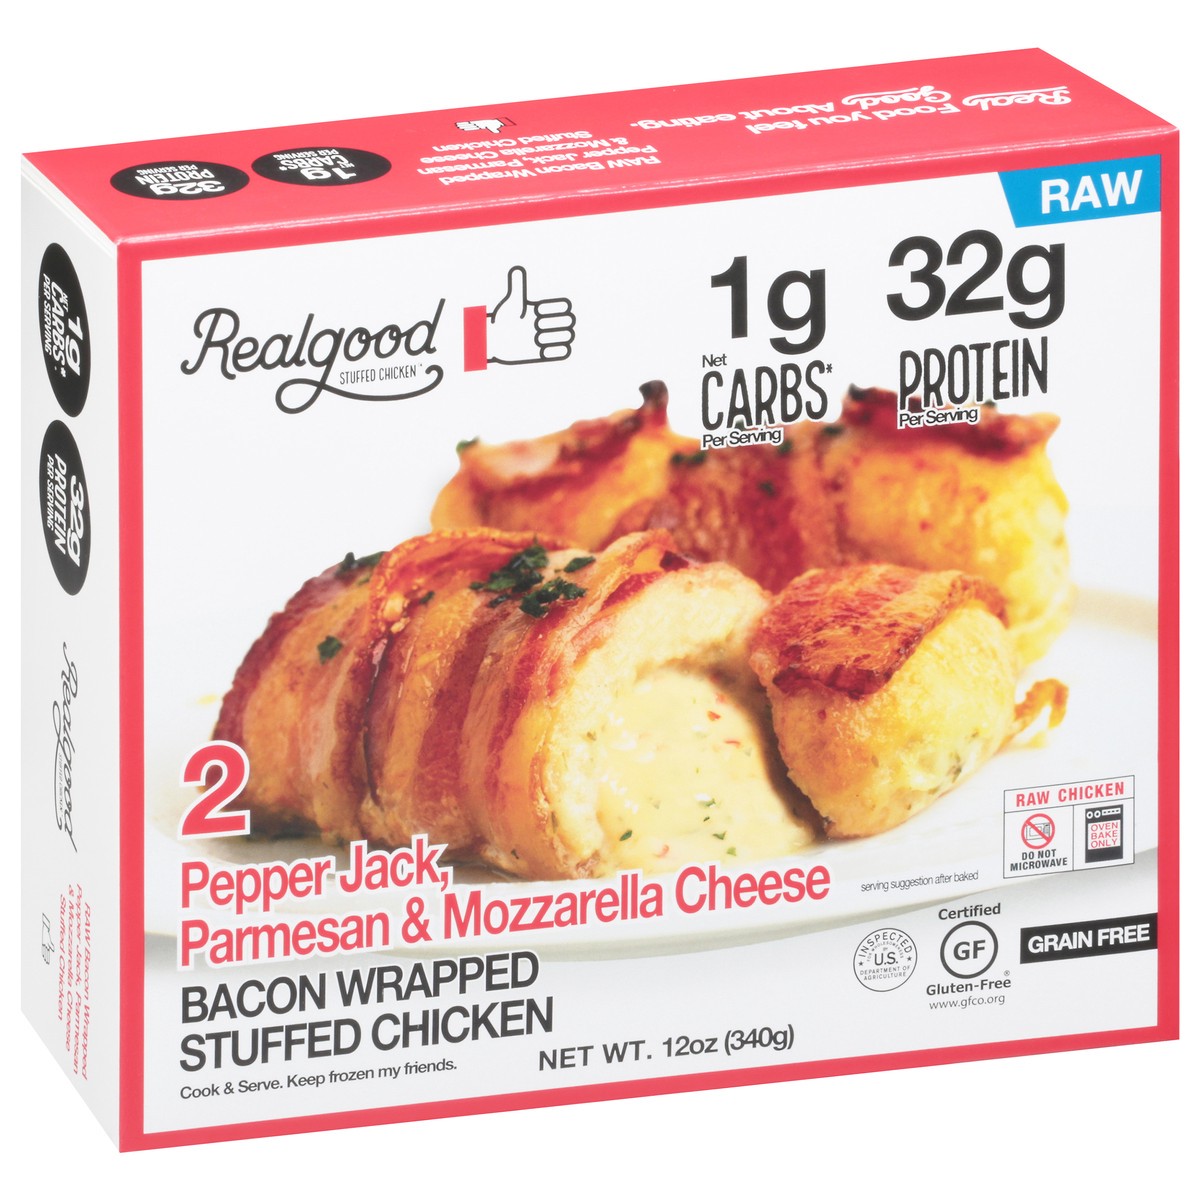 slide 2 of 13, Realgood Foods Co. Pepper Jack, Parmesan & Mozzarella Cheese Bacon Wrapped Stuffed Chicken 2 ea, 12 oz